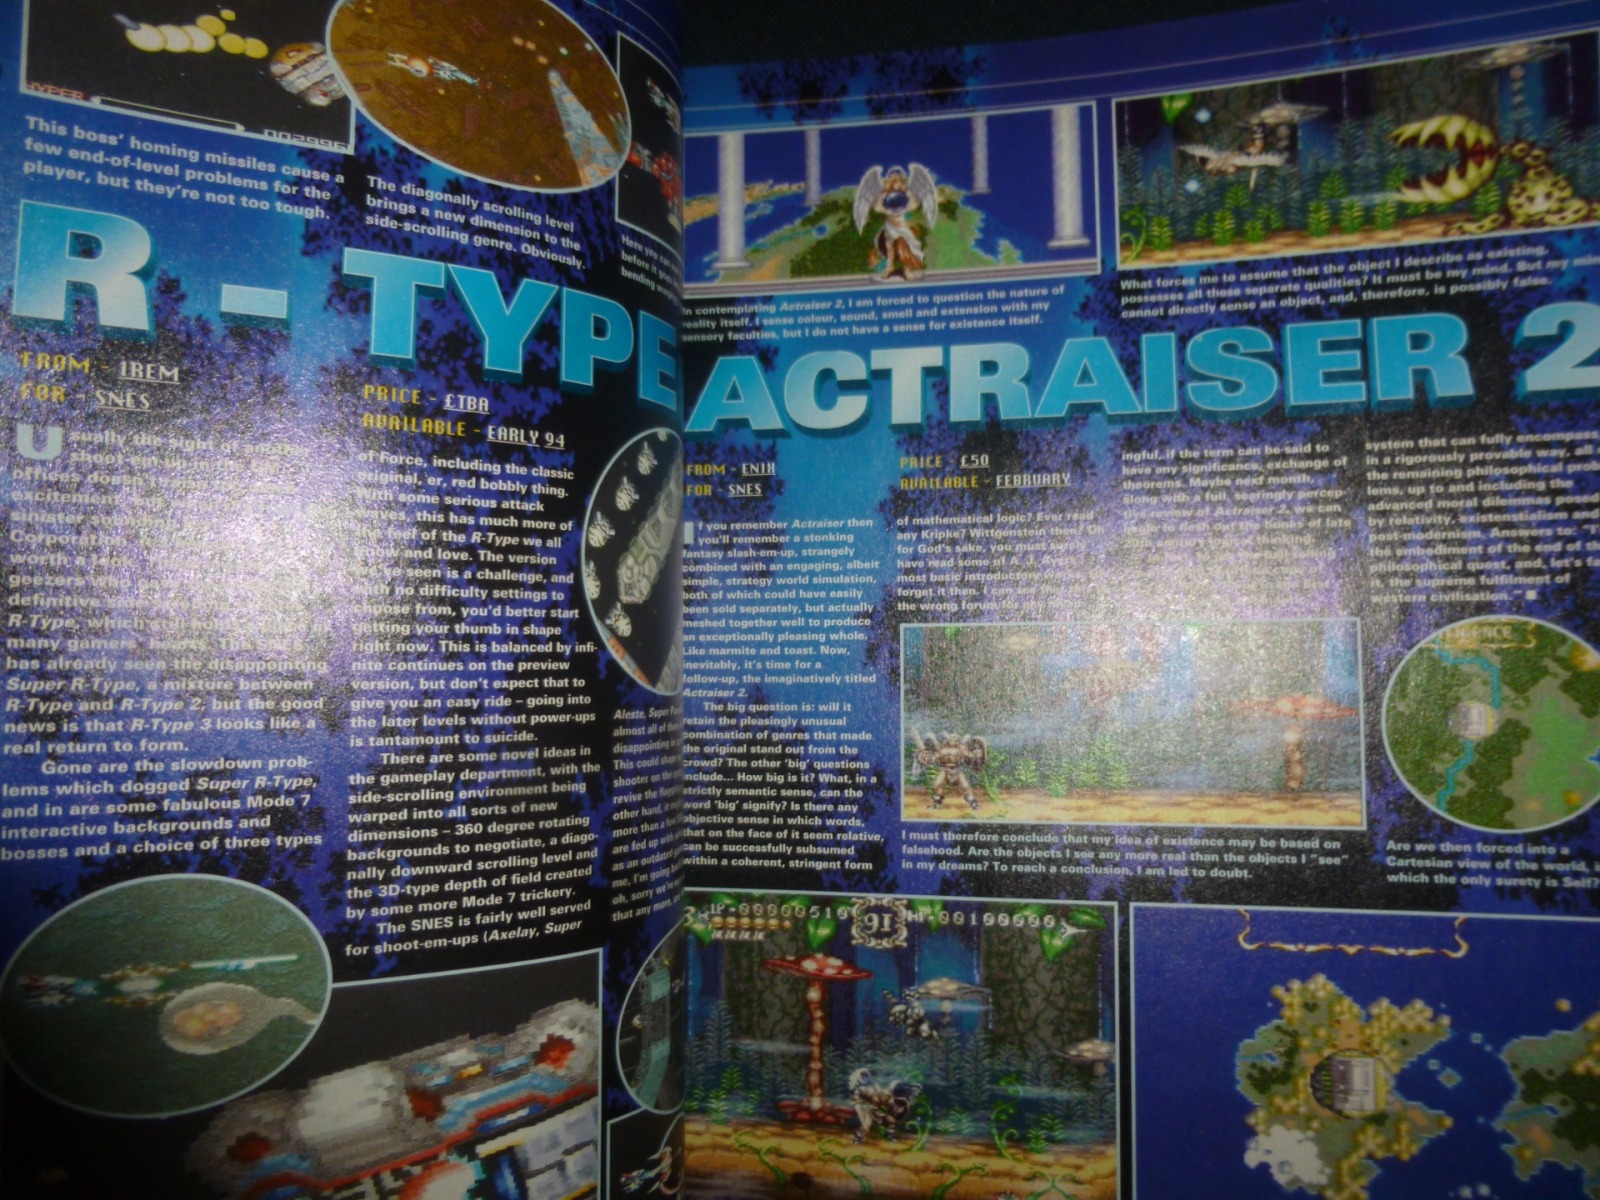 Games Master - January 1994 4